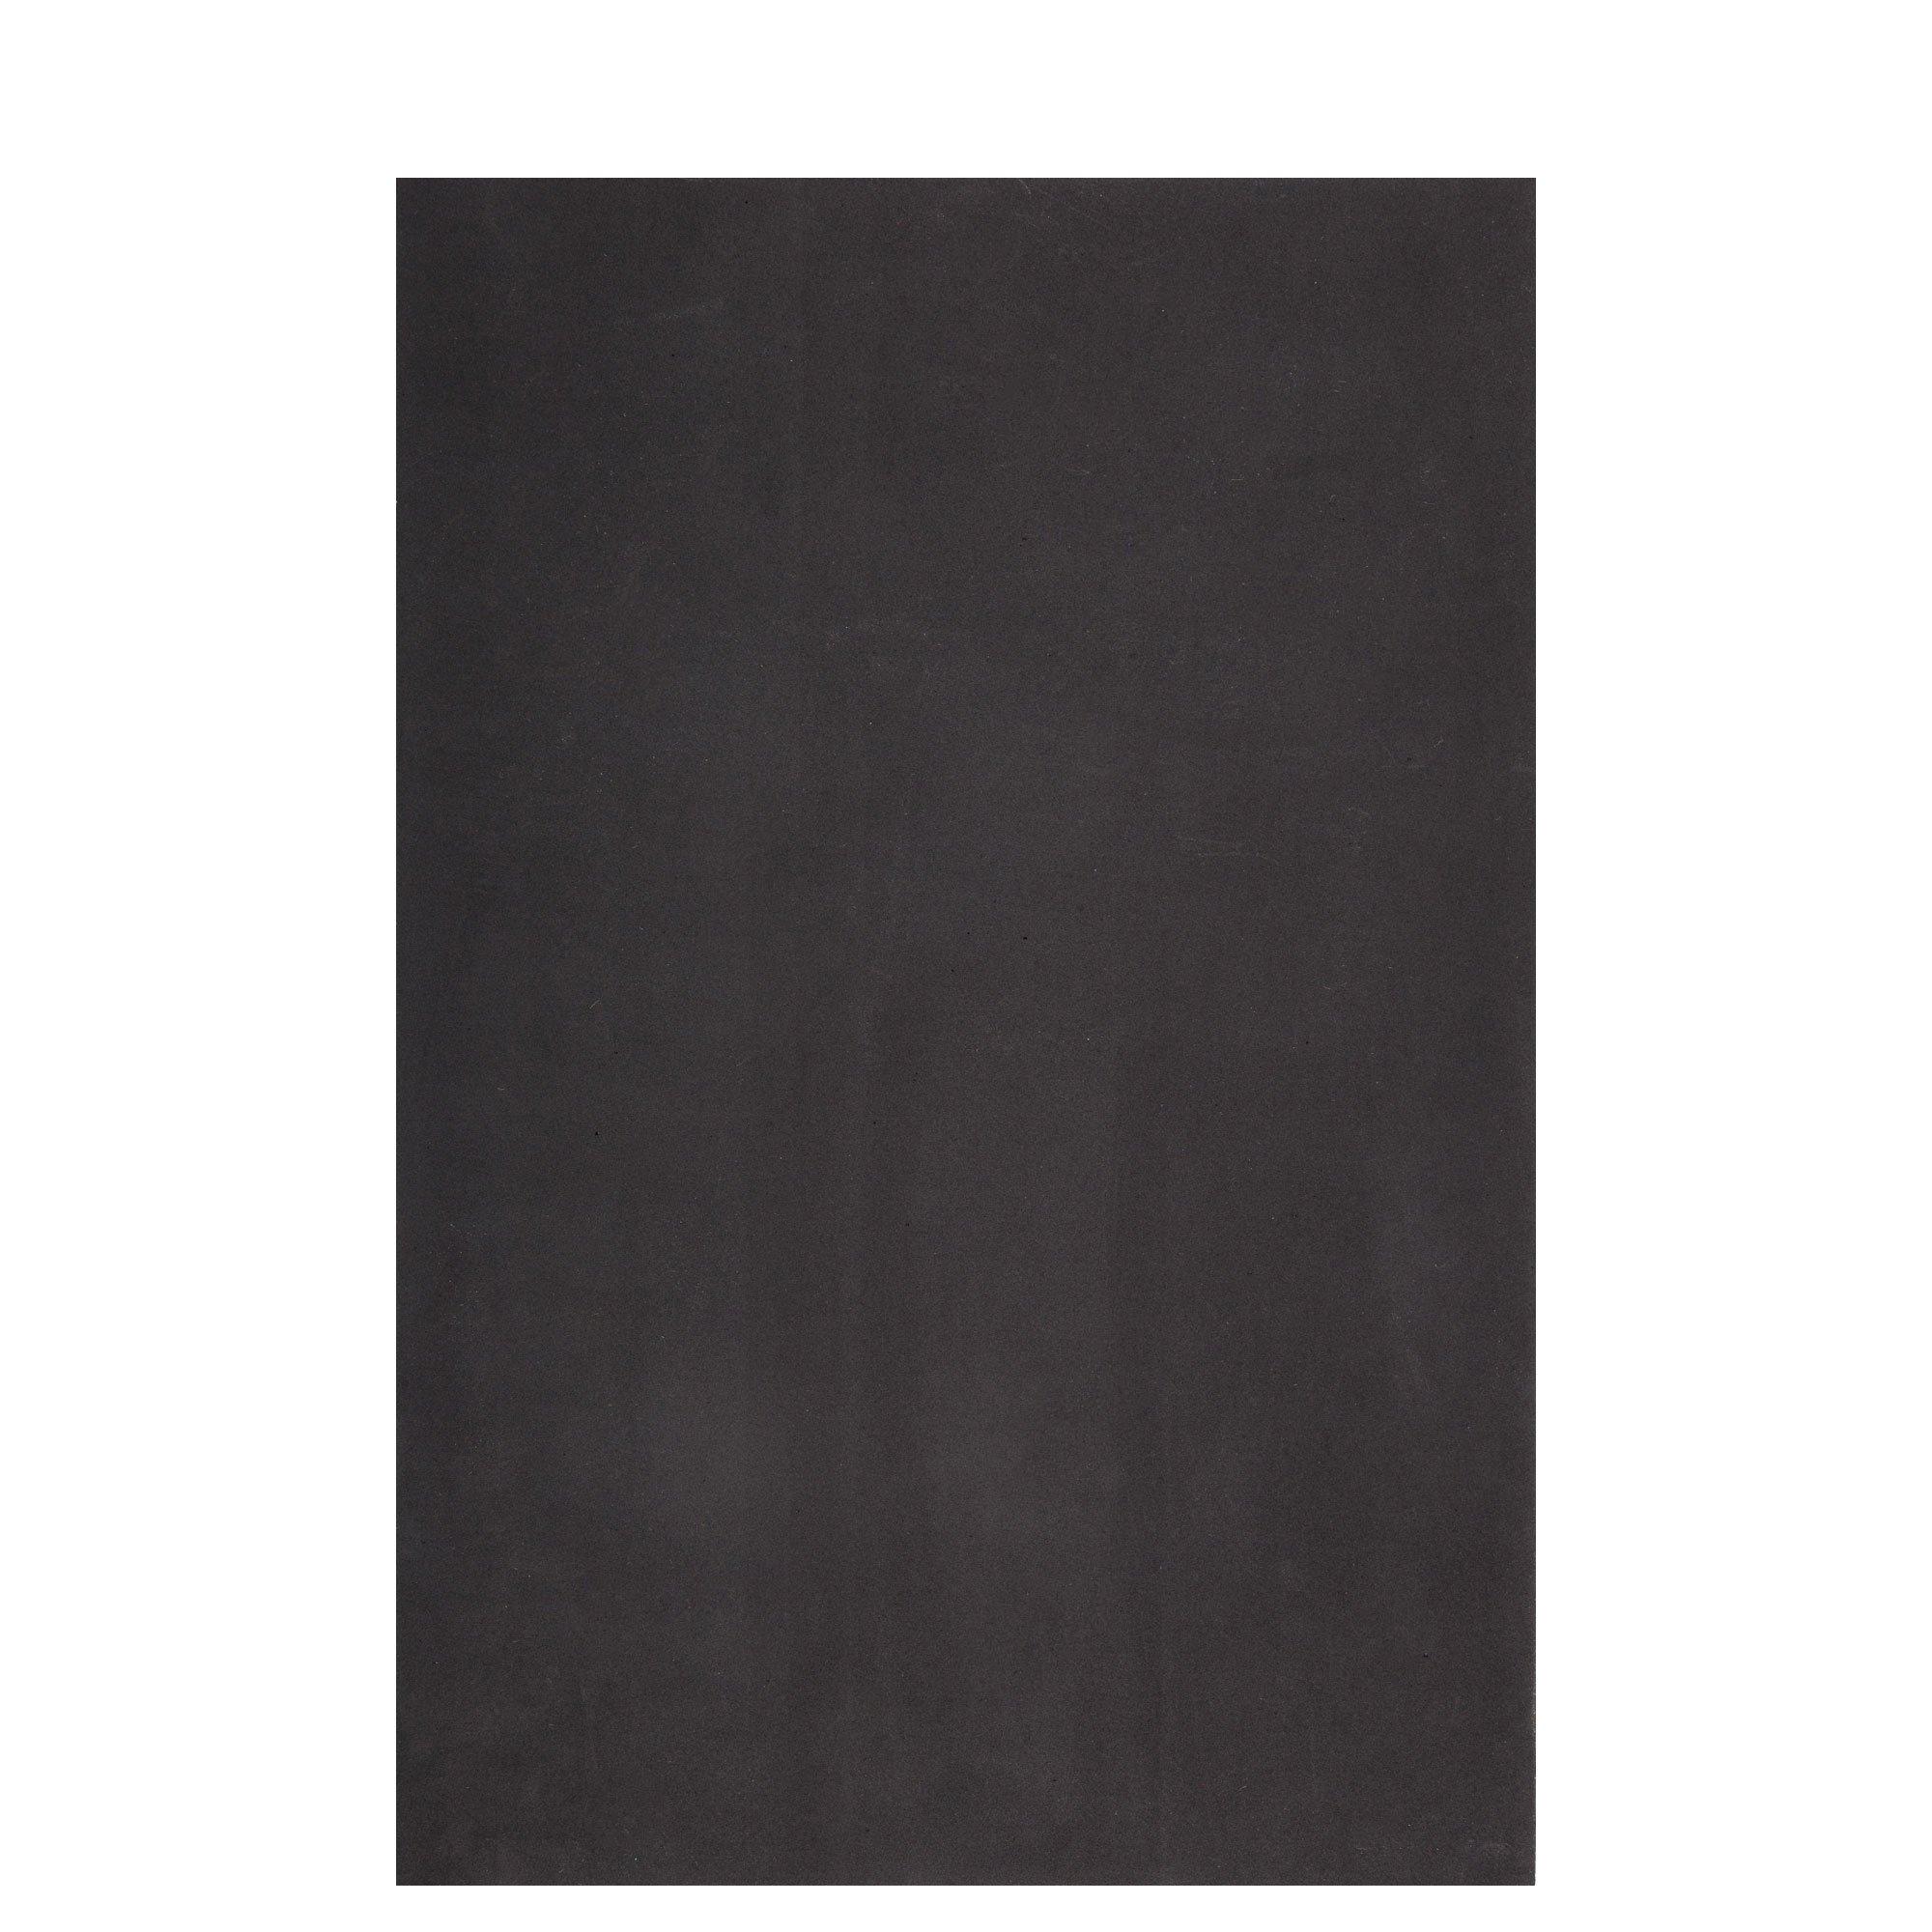 New Sheet of Black and White Kaizen Foam - arts & crafts - by